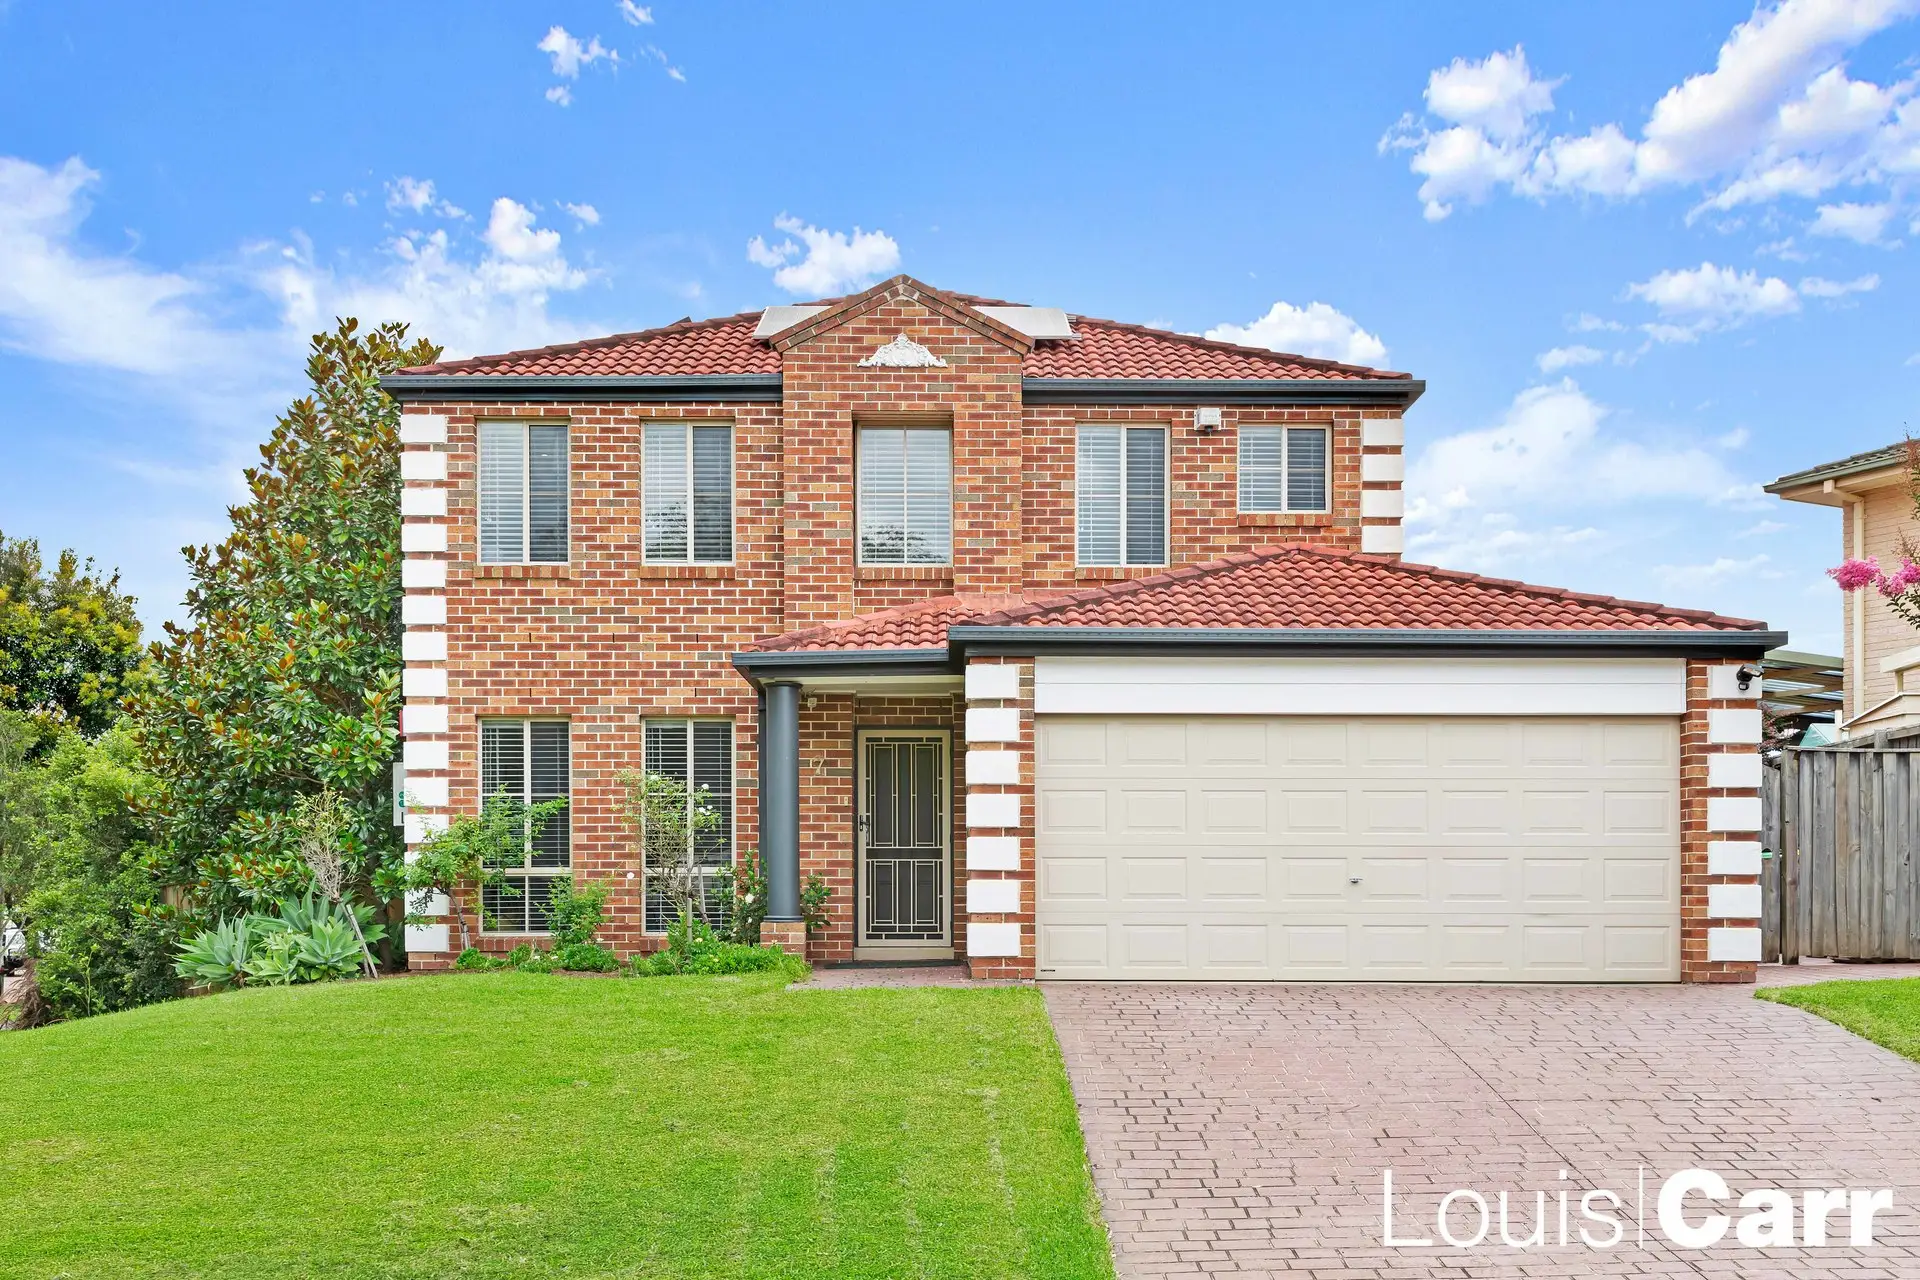 7 Borrowdale Way, Beaumont Hills Sold by Louis Carr Real Estate - image 1